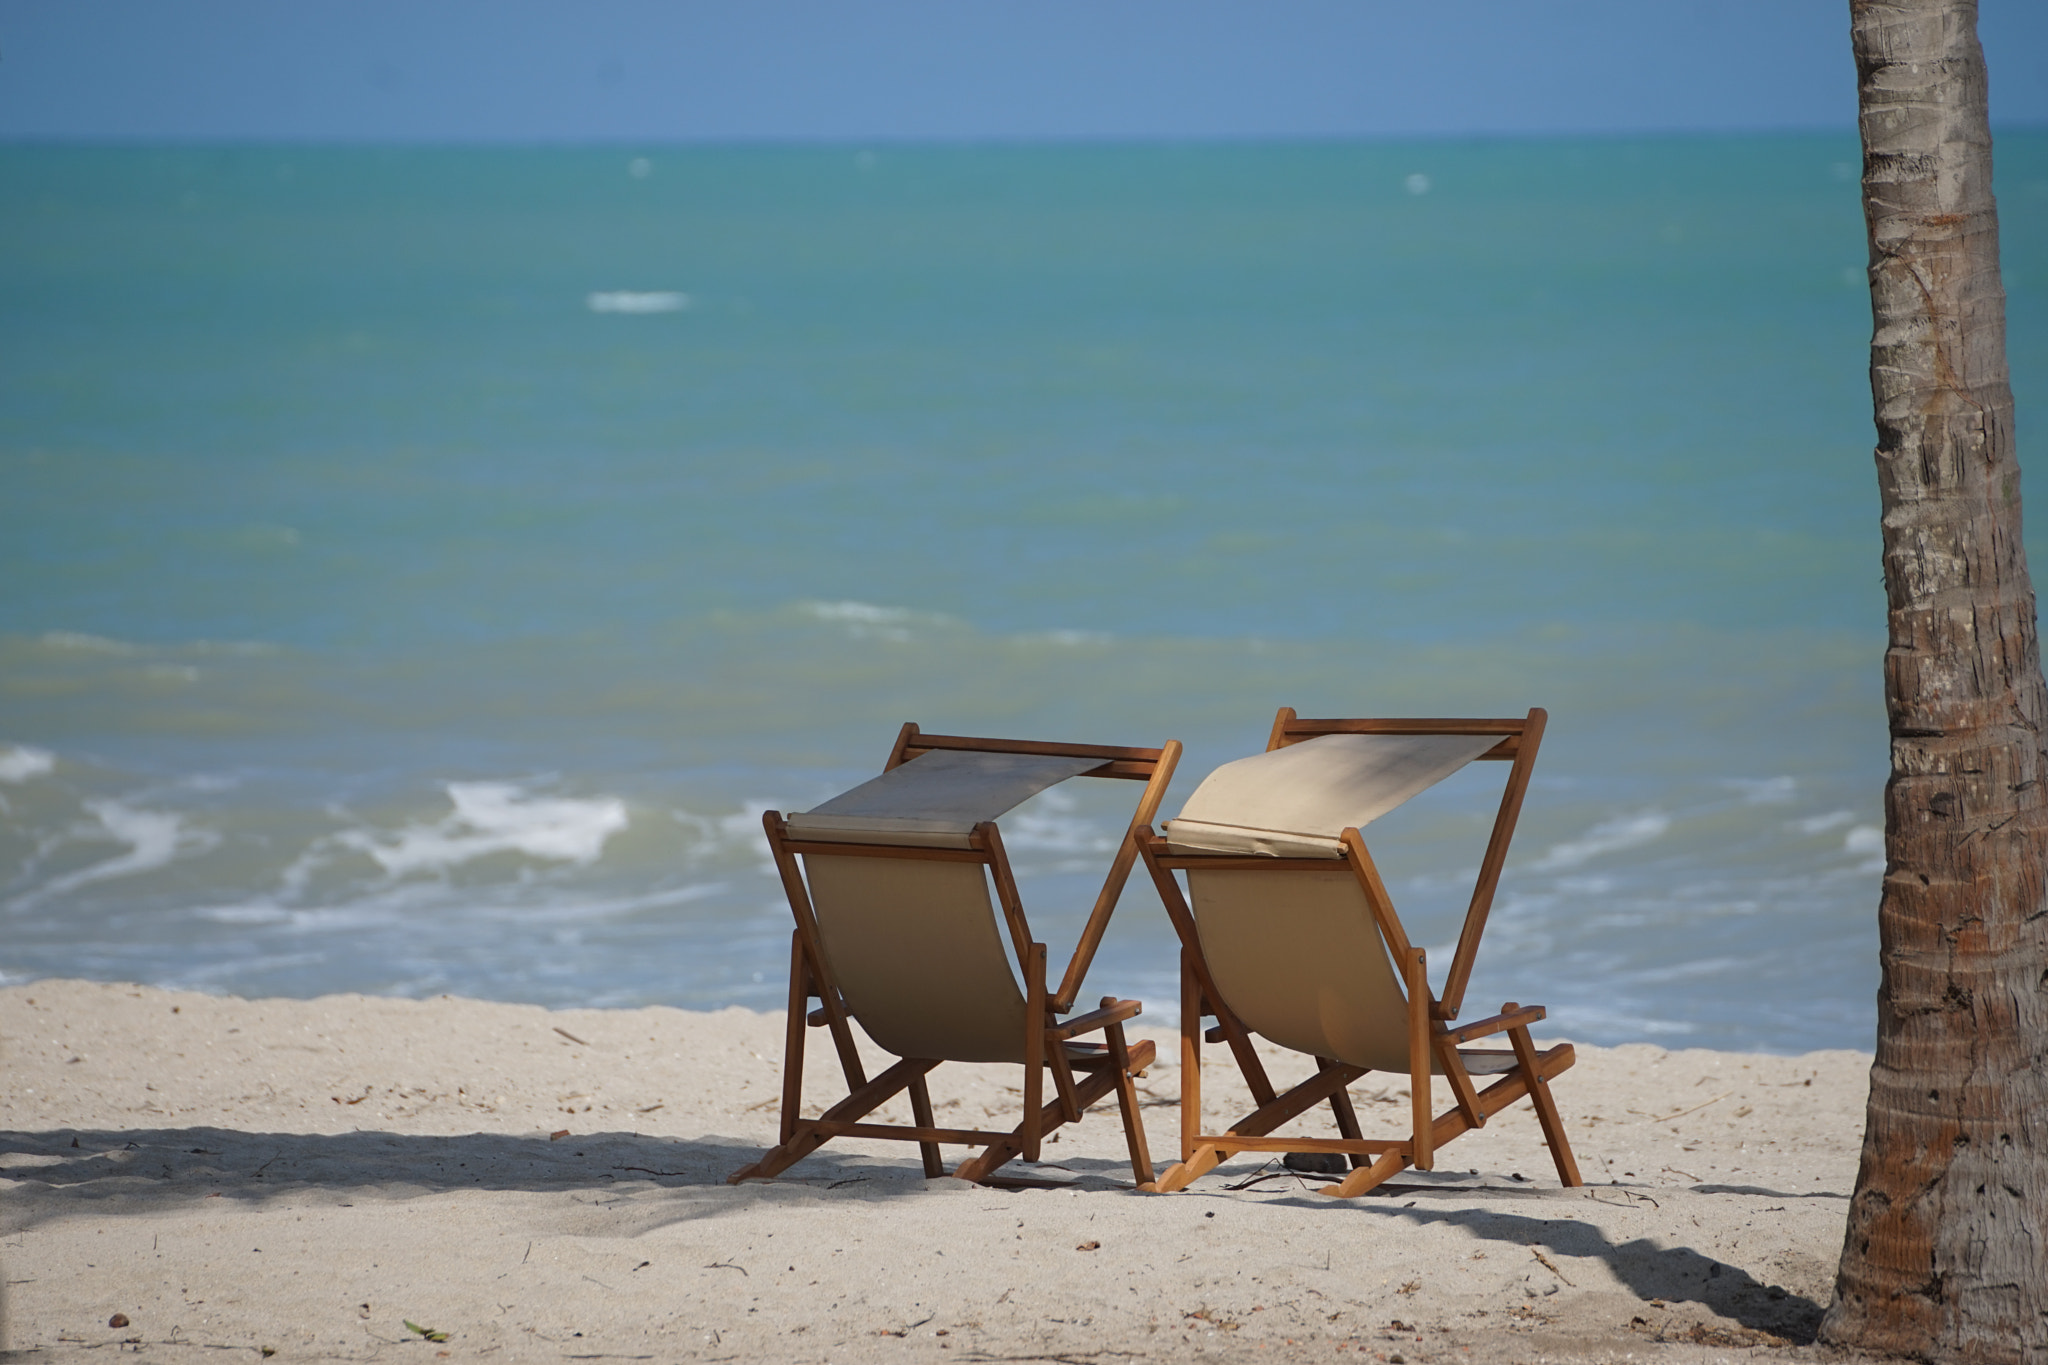 Sony a7 + Tamron SP 70-300mm F4-5.6 Di USD sample photo. Beach chairs photography